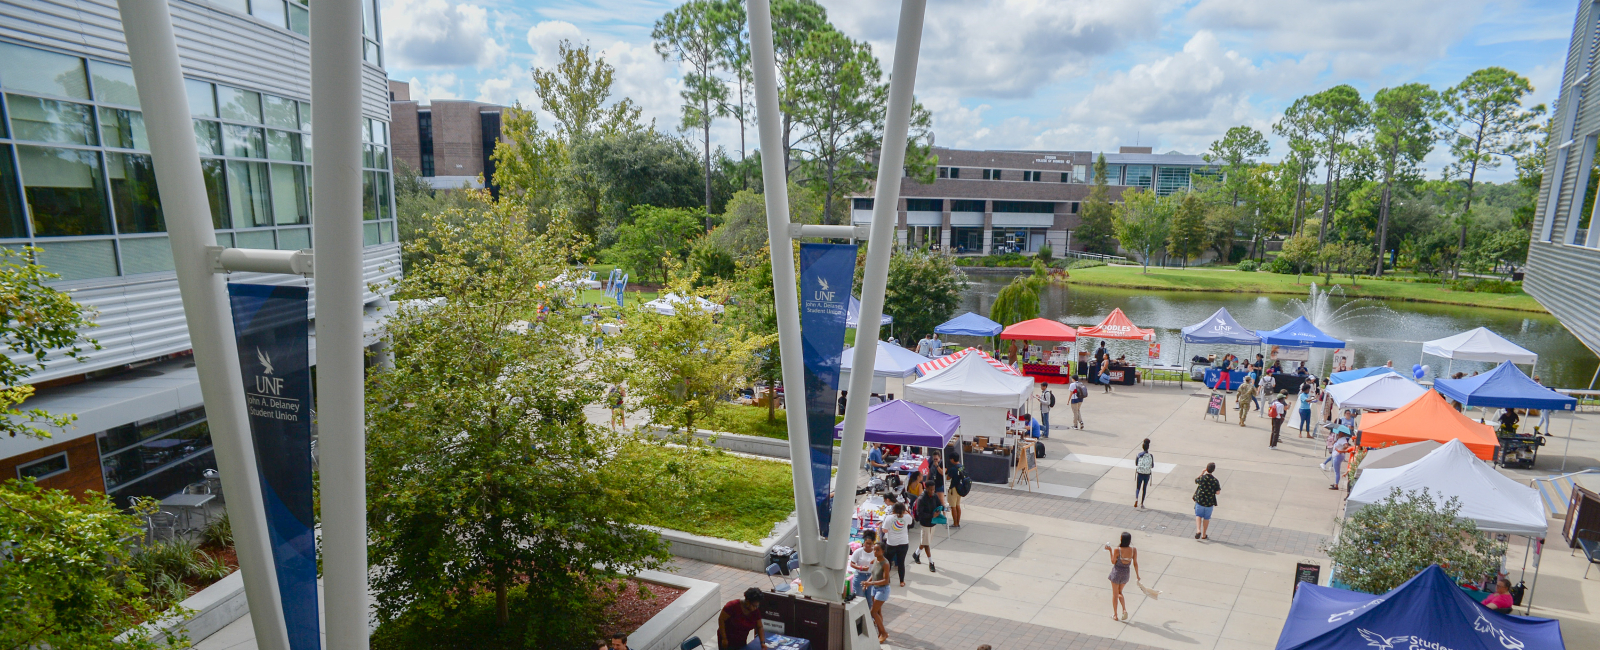 view of students at Market Days at the Student Union